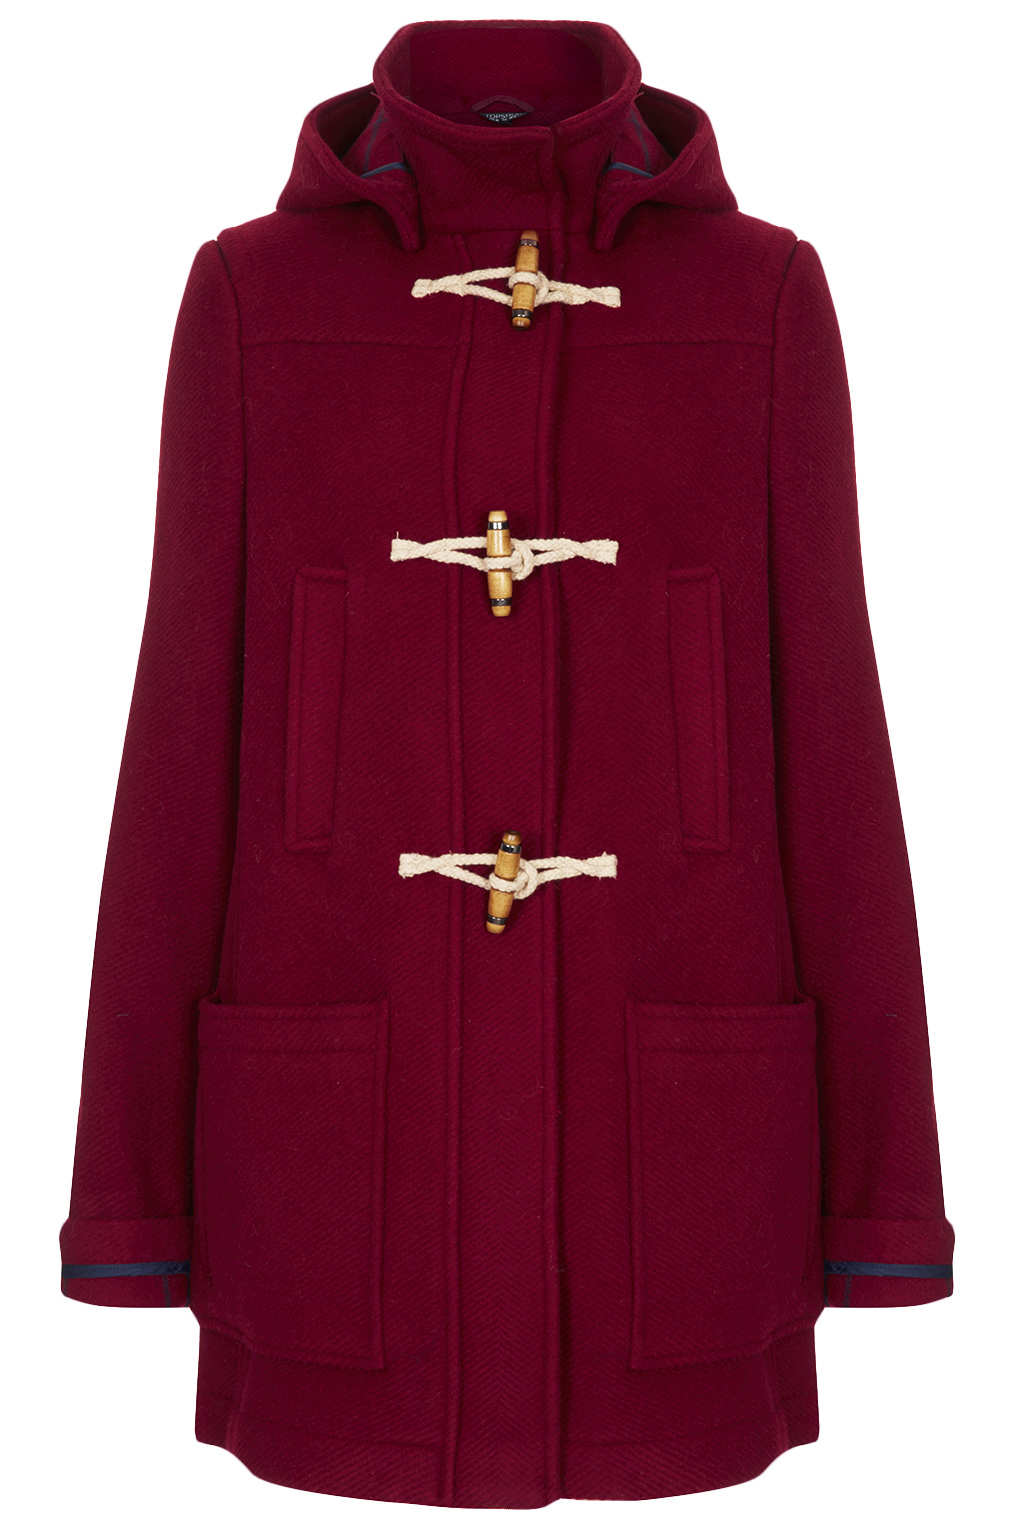 Topshop Bound Seam Duffle Coat in Red (CHERRY) | Lyst